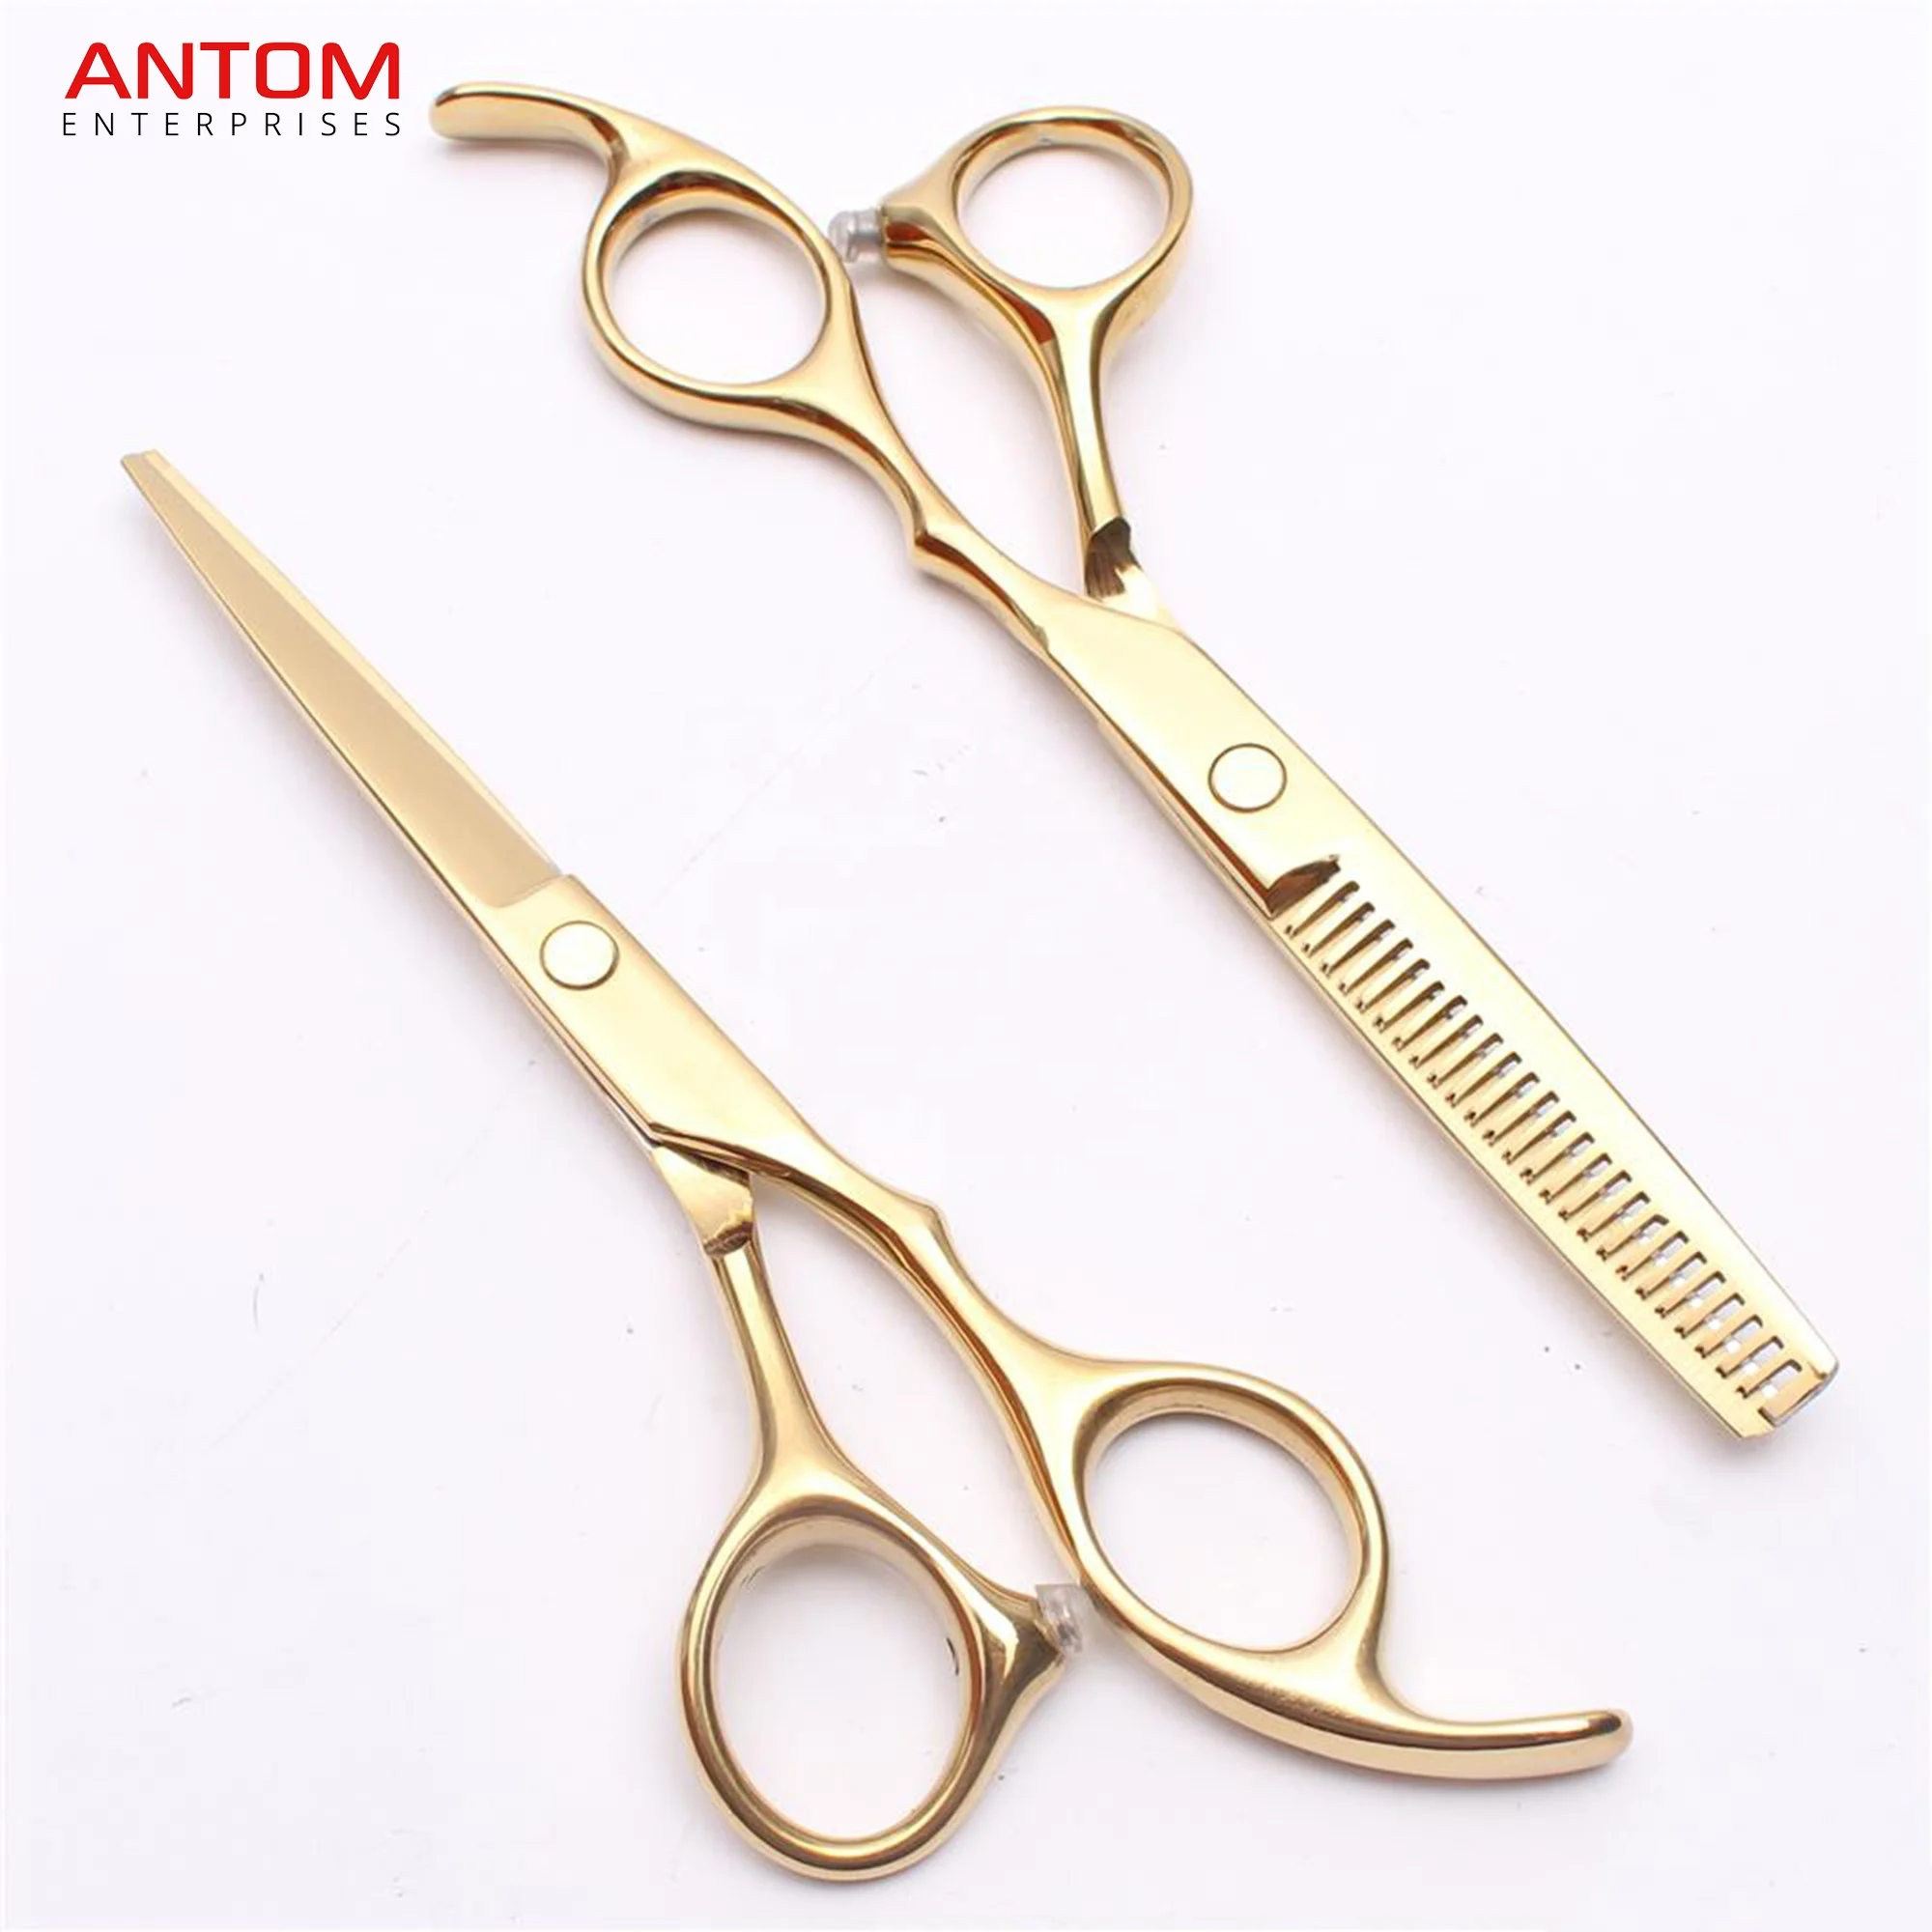 different types of hair cutting scissors